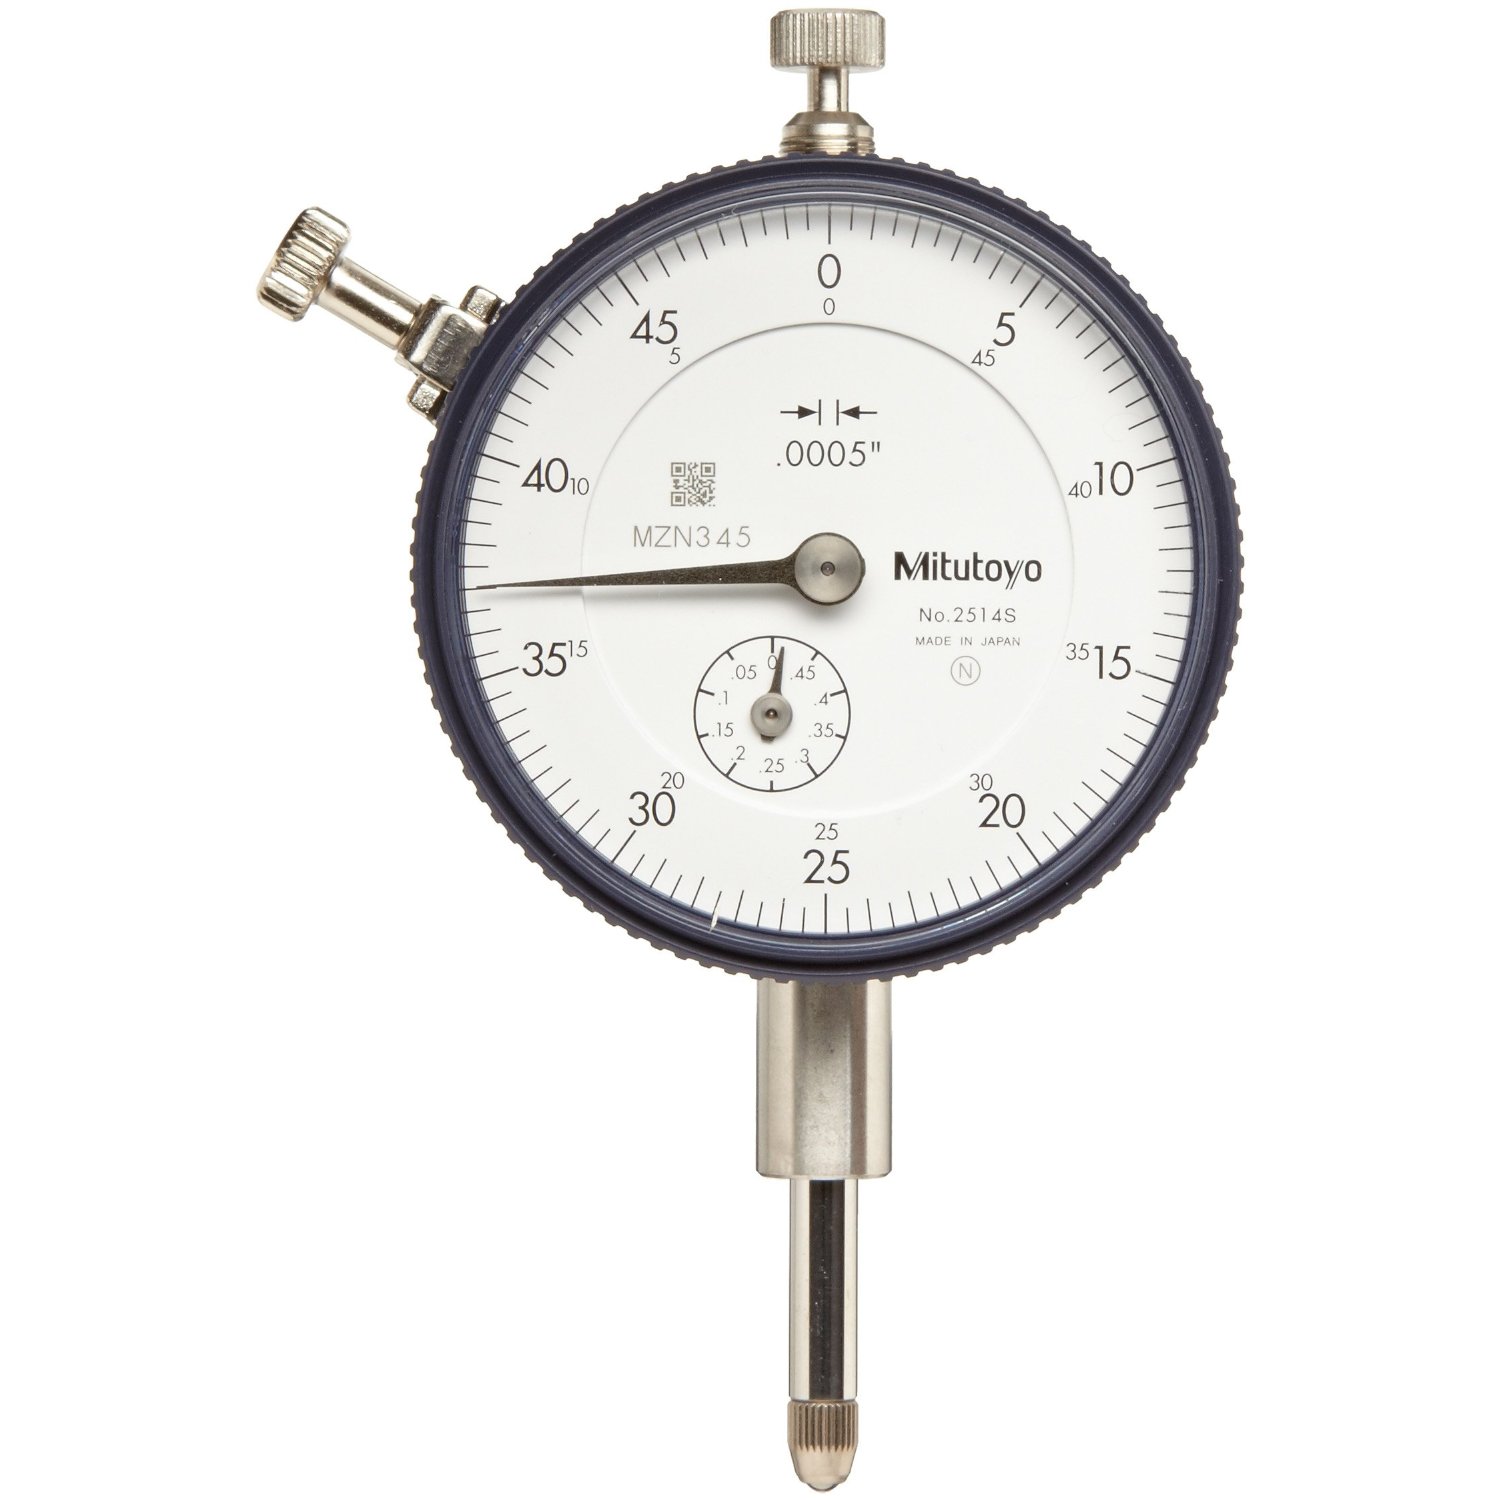 Mitutoyo 2514S Dial Indicator 0.5/0.0005 - Click Image to Close